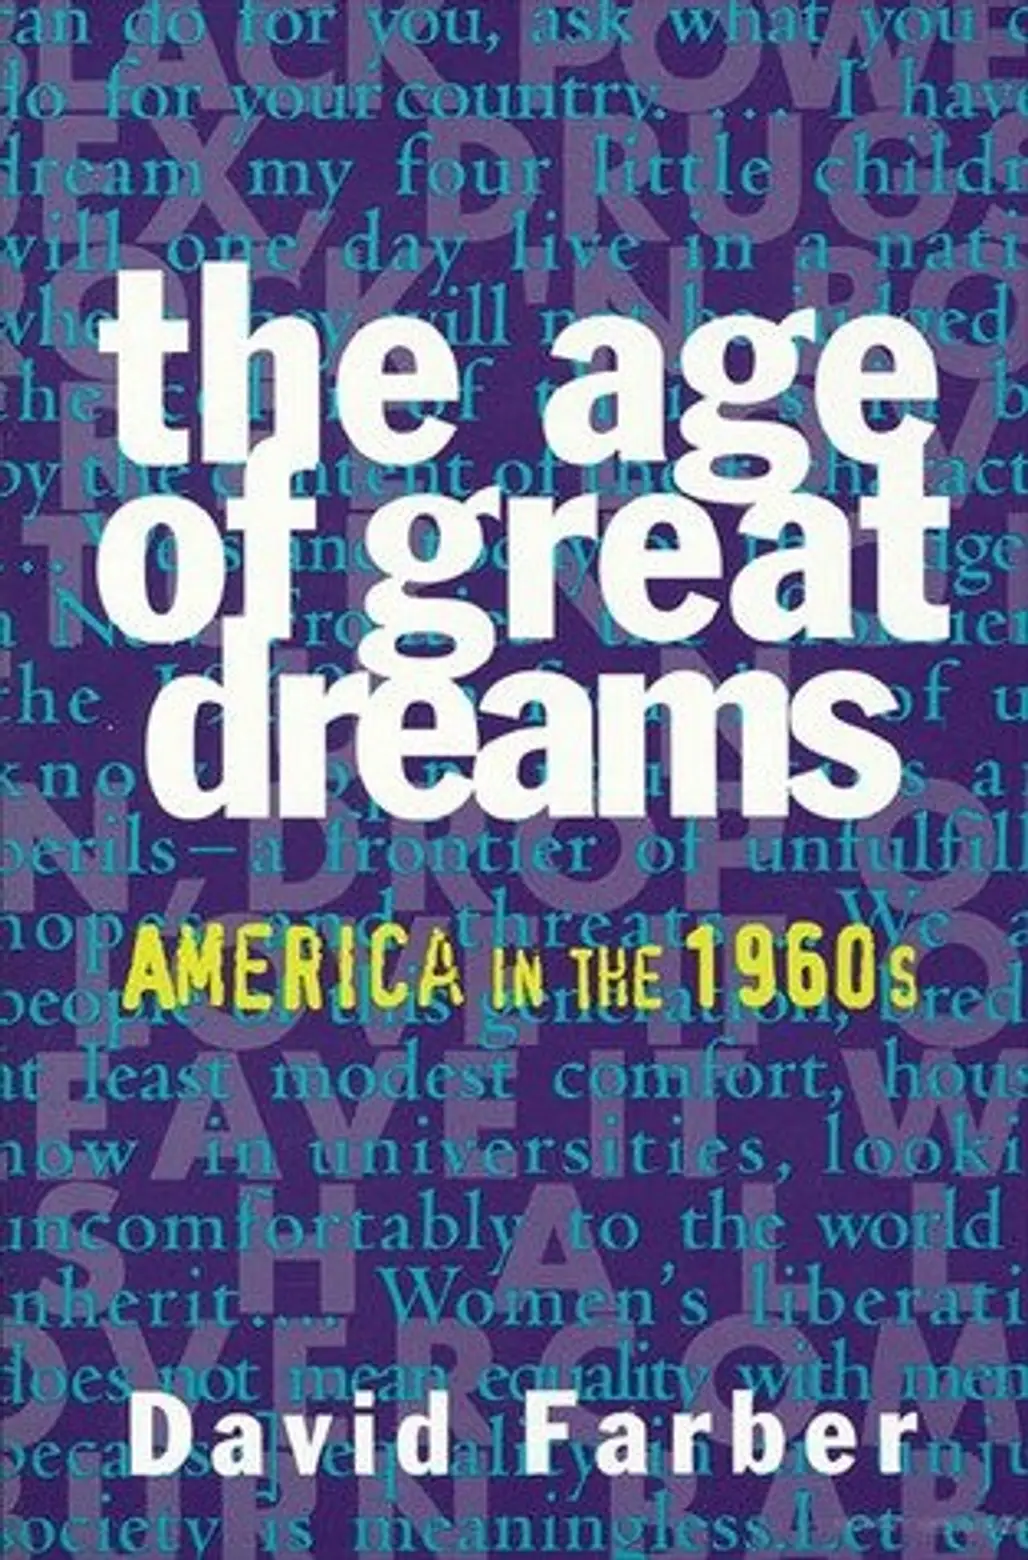 The Age of Great Dreams: America in the 1960s